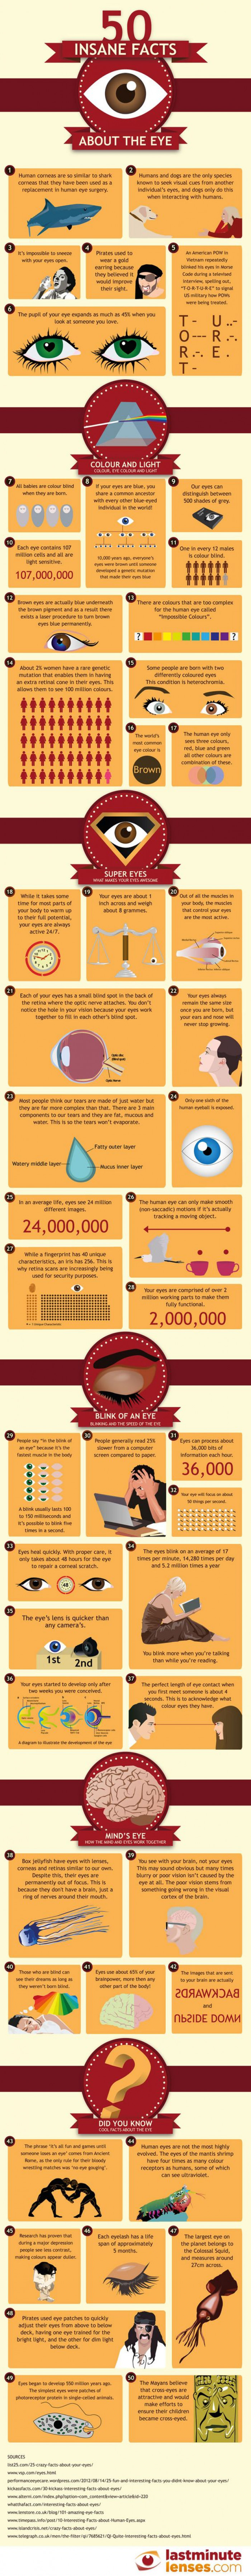 50 Insane And Amazing Facts About The Human Eye